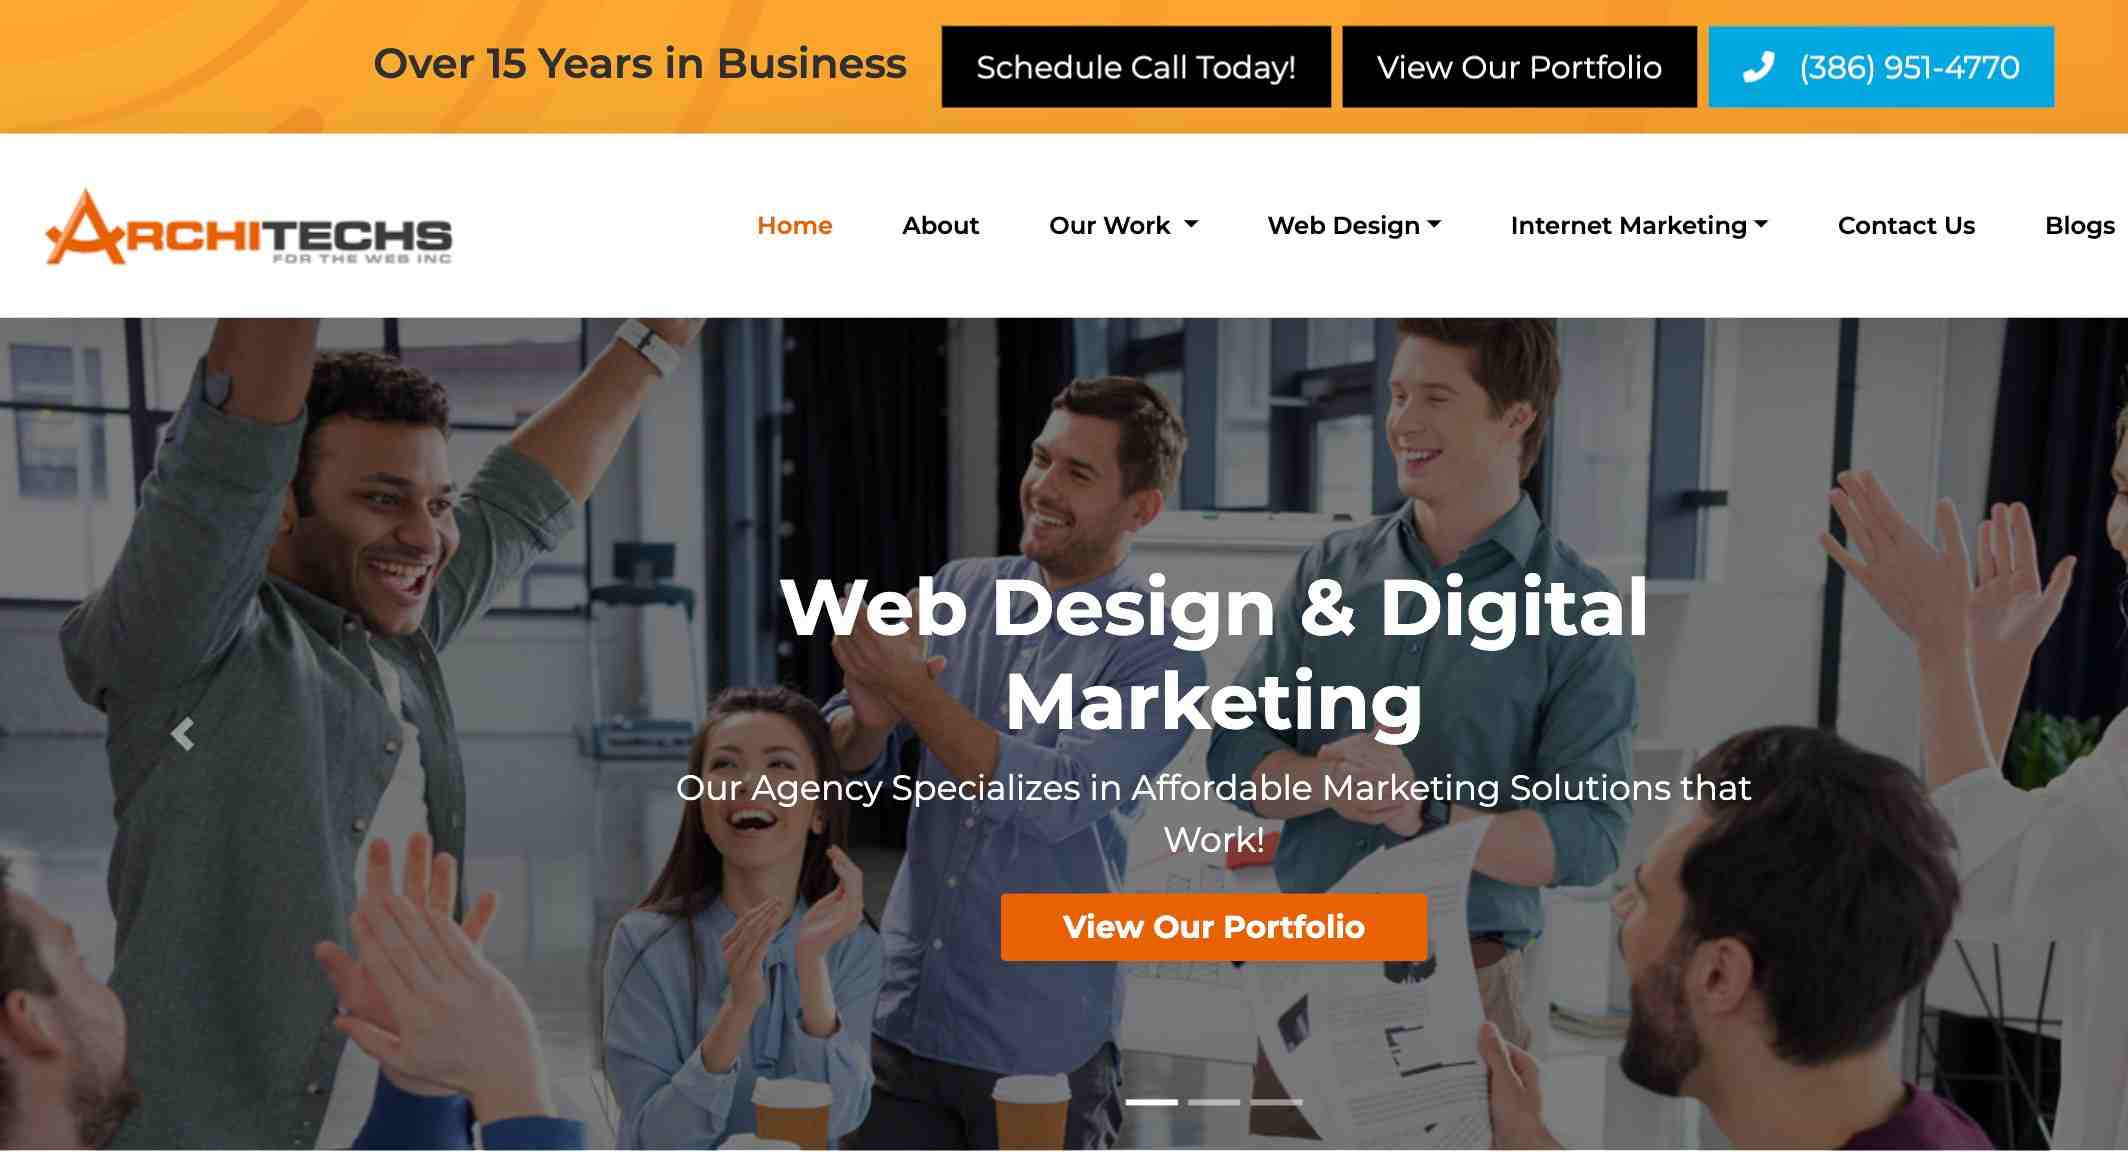 Architechs for the Web, Inc